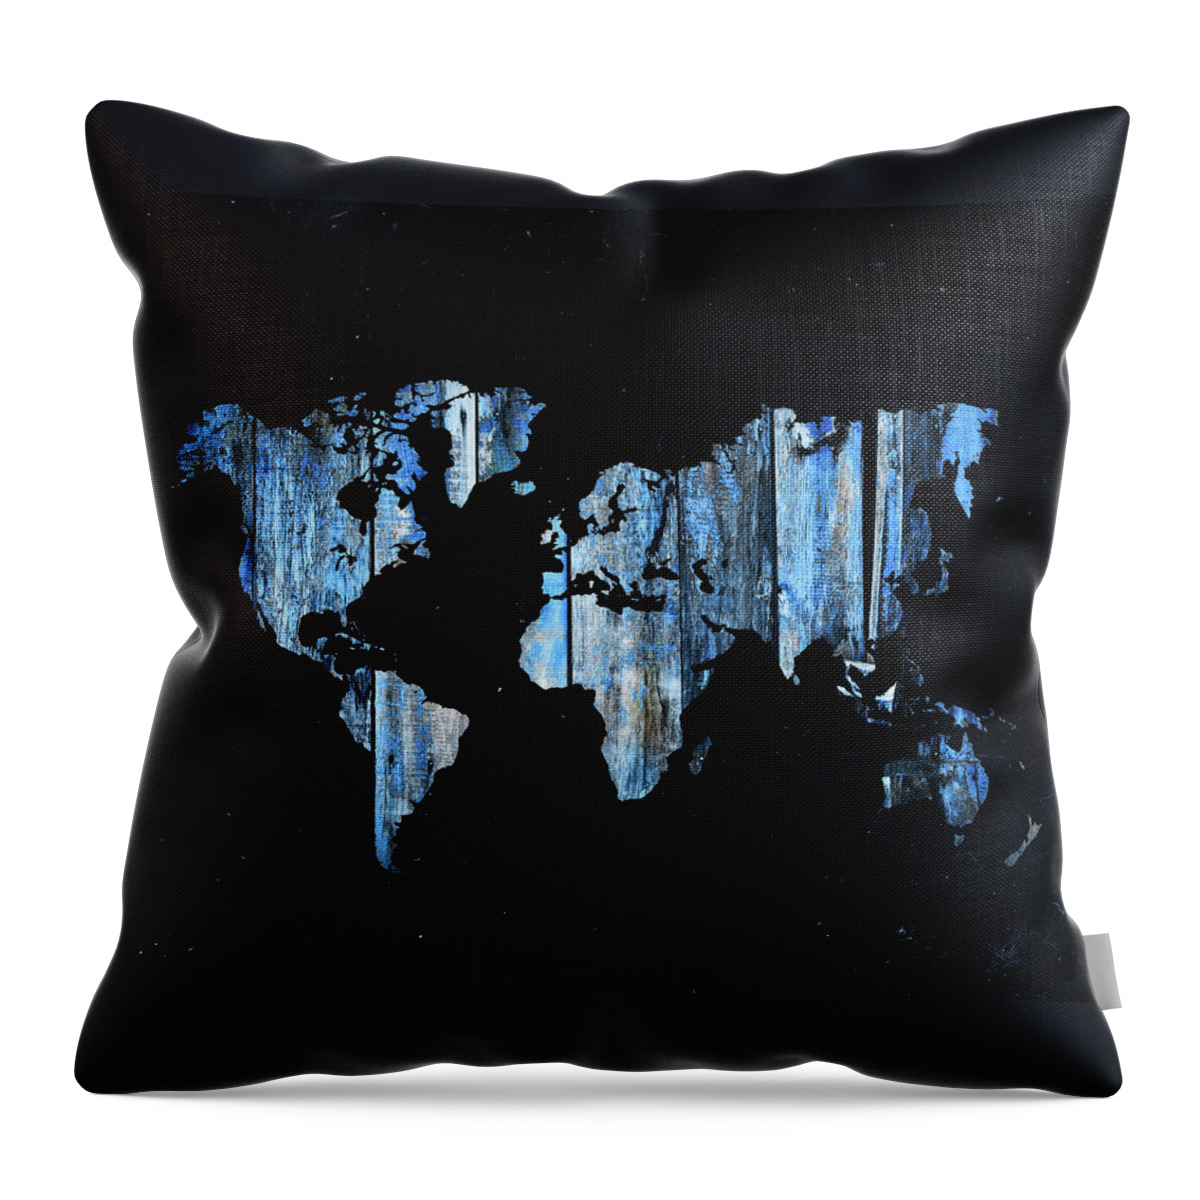 World Throw Pillow featuring the photograph Blue planks on black world map by Delphimages Map Creations